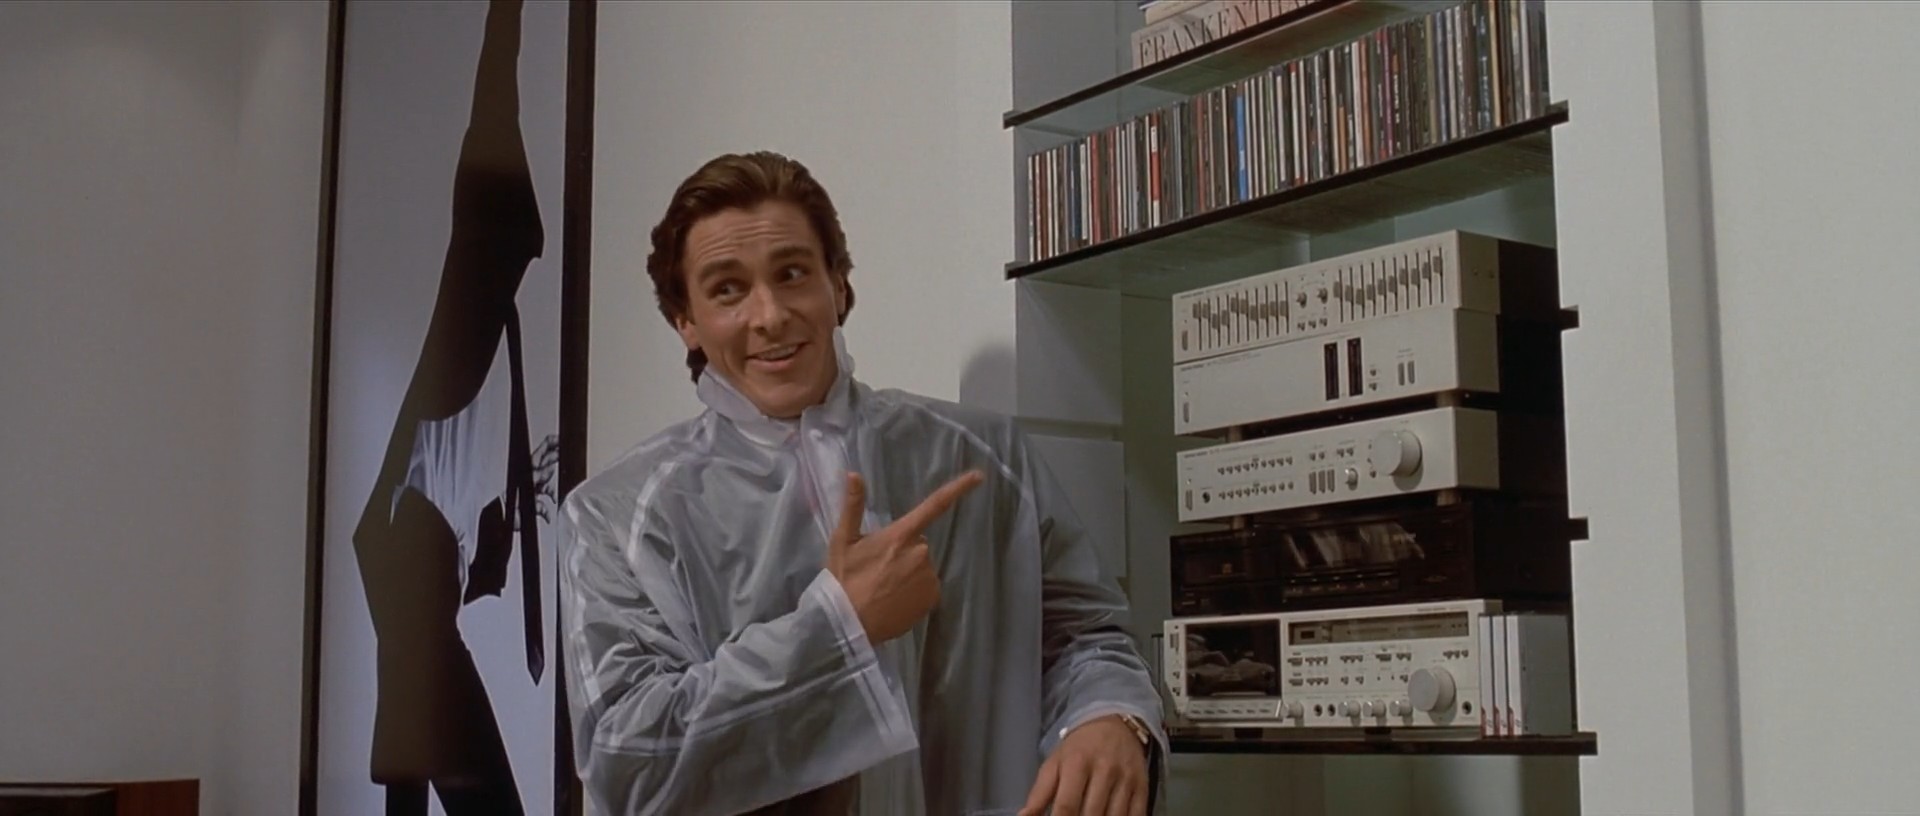 The underrated brilliance of American Psycho.